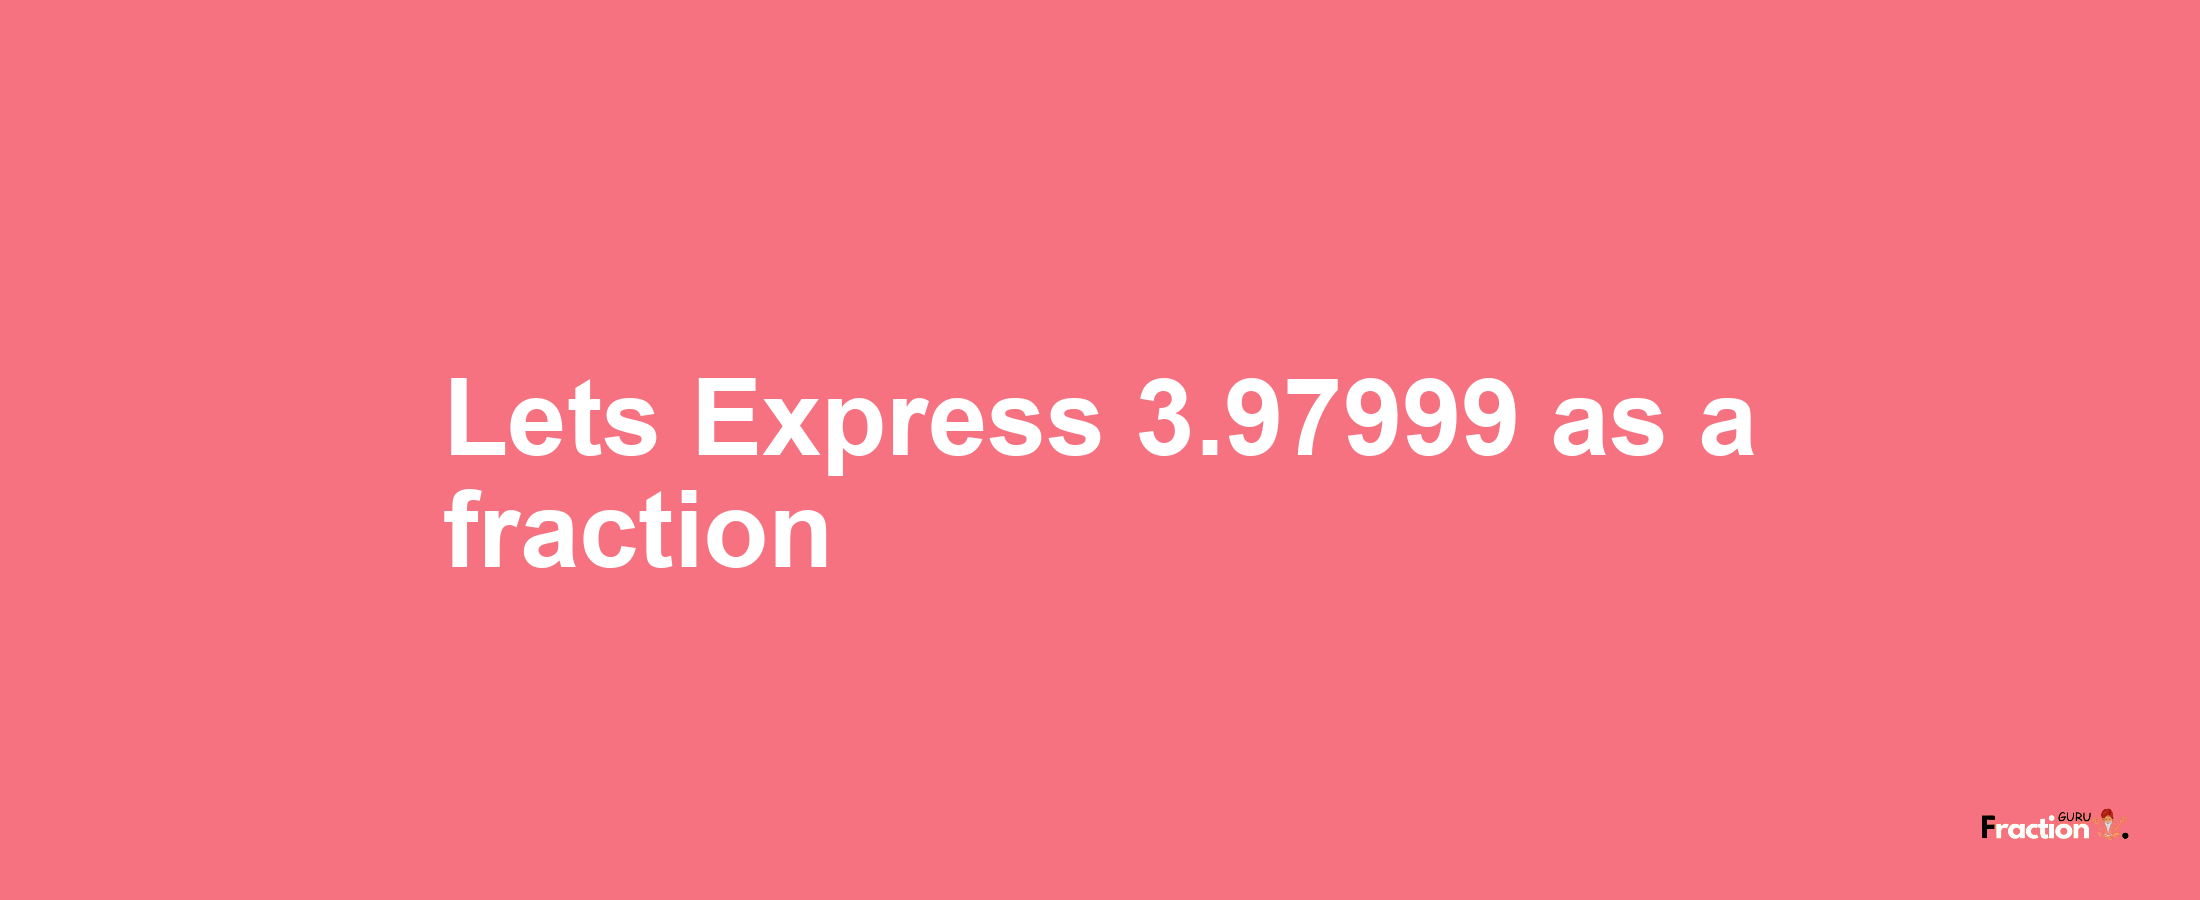 Lets Express 3.97999 as afraction